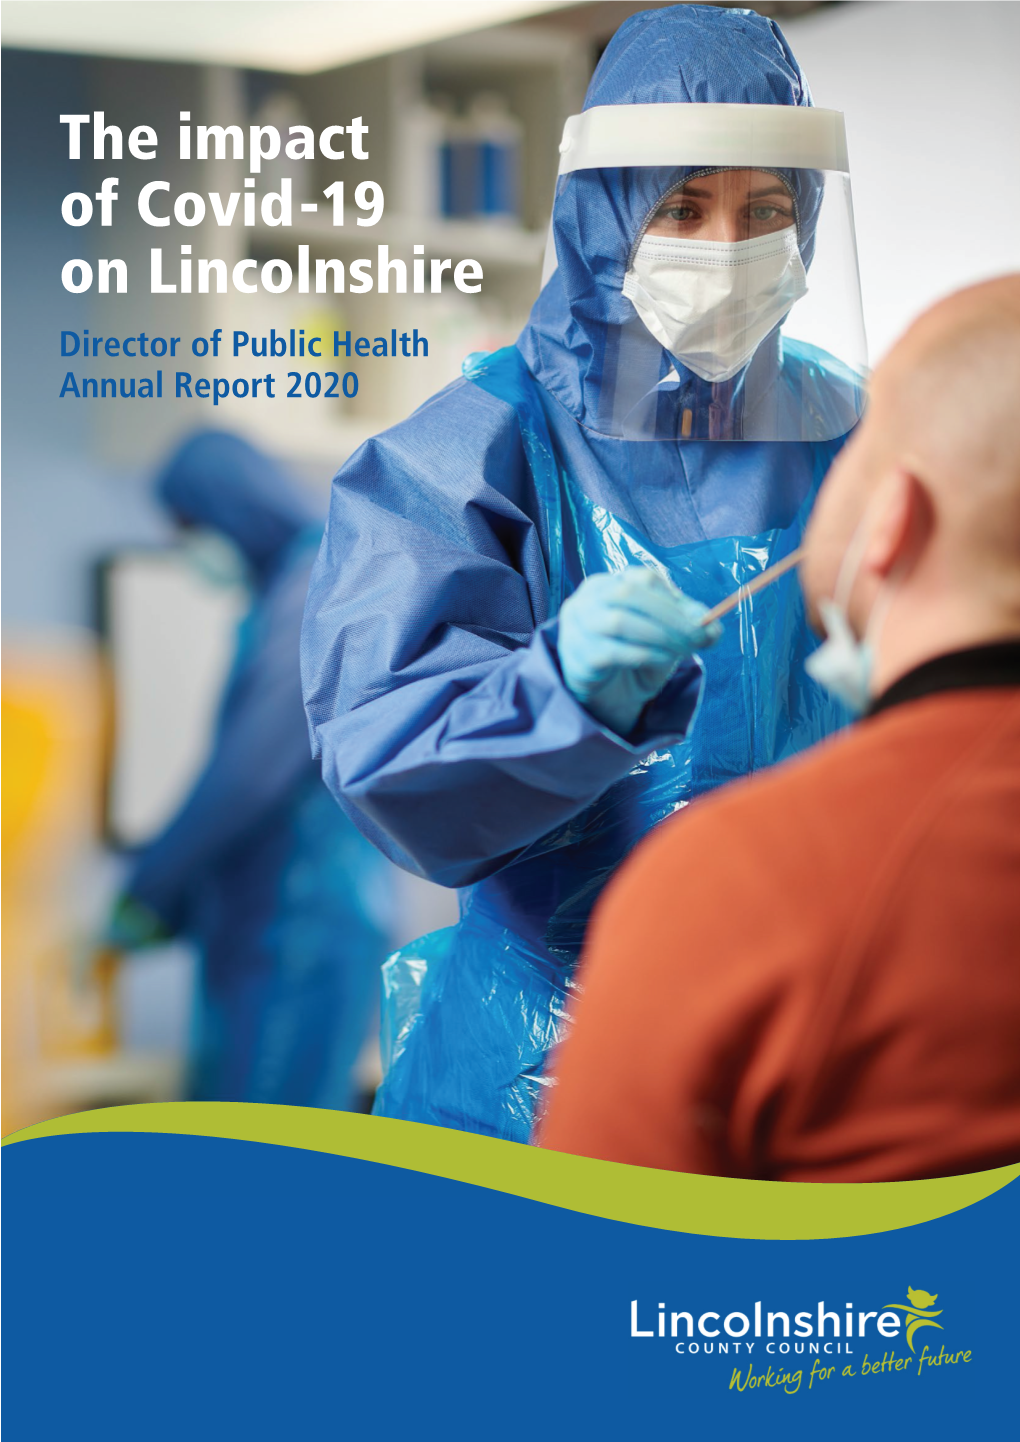 Director of Public Health Annual Report 2020 the Impact of Covid-19 on Lincolnshire Director of Public Health Annual Report 2020